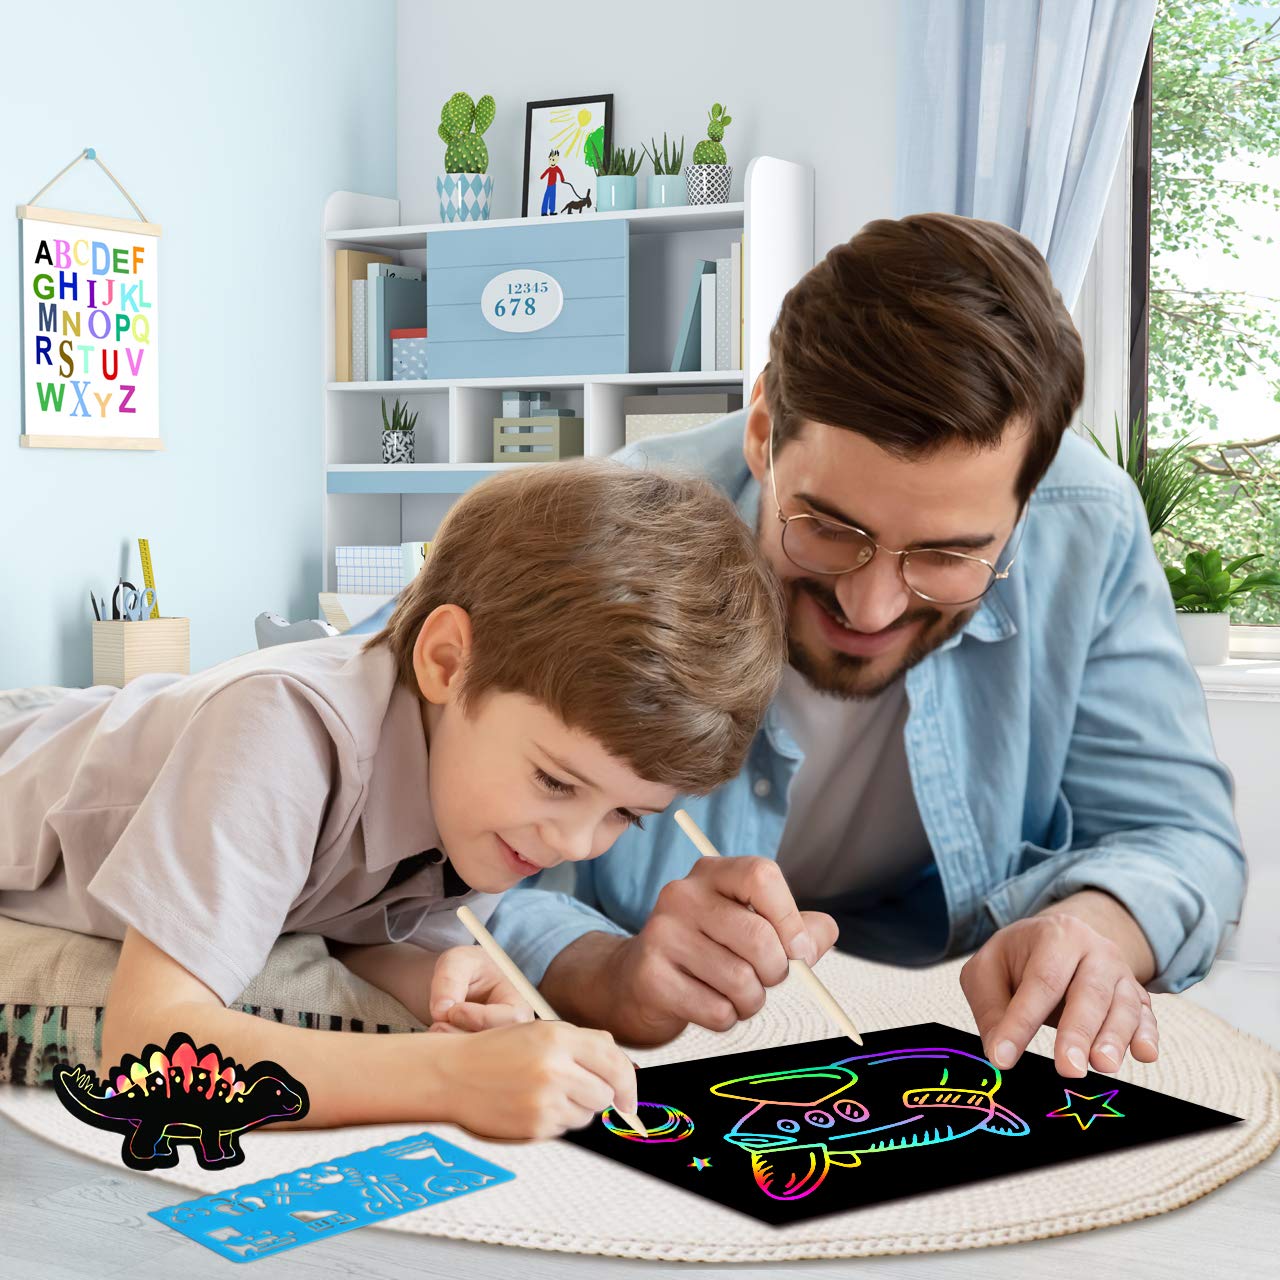 RMJOY Art-Craft Scratch Paper for Kids: Magic Rainbow Drawing Art Pads Leaning Supplies Kits for Kids Teen 4-12 Years Old Preschool Boys Toy Game Gift for Birthday Party Favor|Coloring Fun|DIY Project